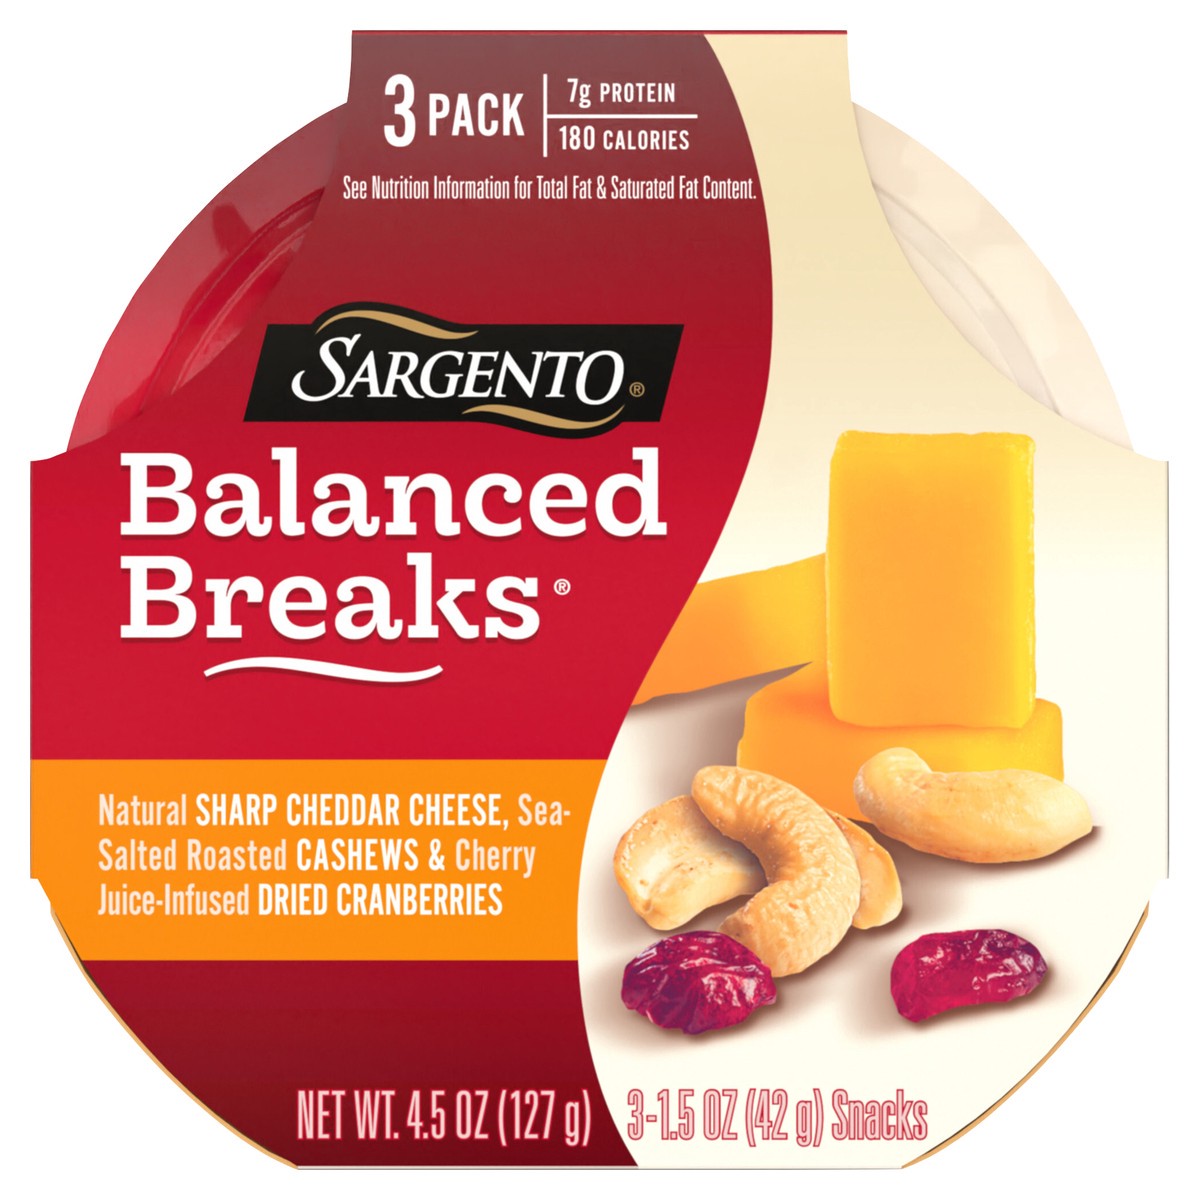 slide 1 of 34, Sargento Balanced Breaks with Natural Sharp Cheddar Cheese, Sea-Salted Cashews and Cherry Juice-Infused Dried Cranberries, 1.5 oz., 3-Pack, 3 ct